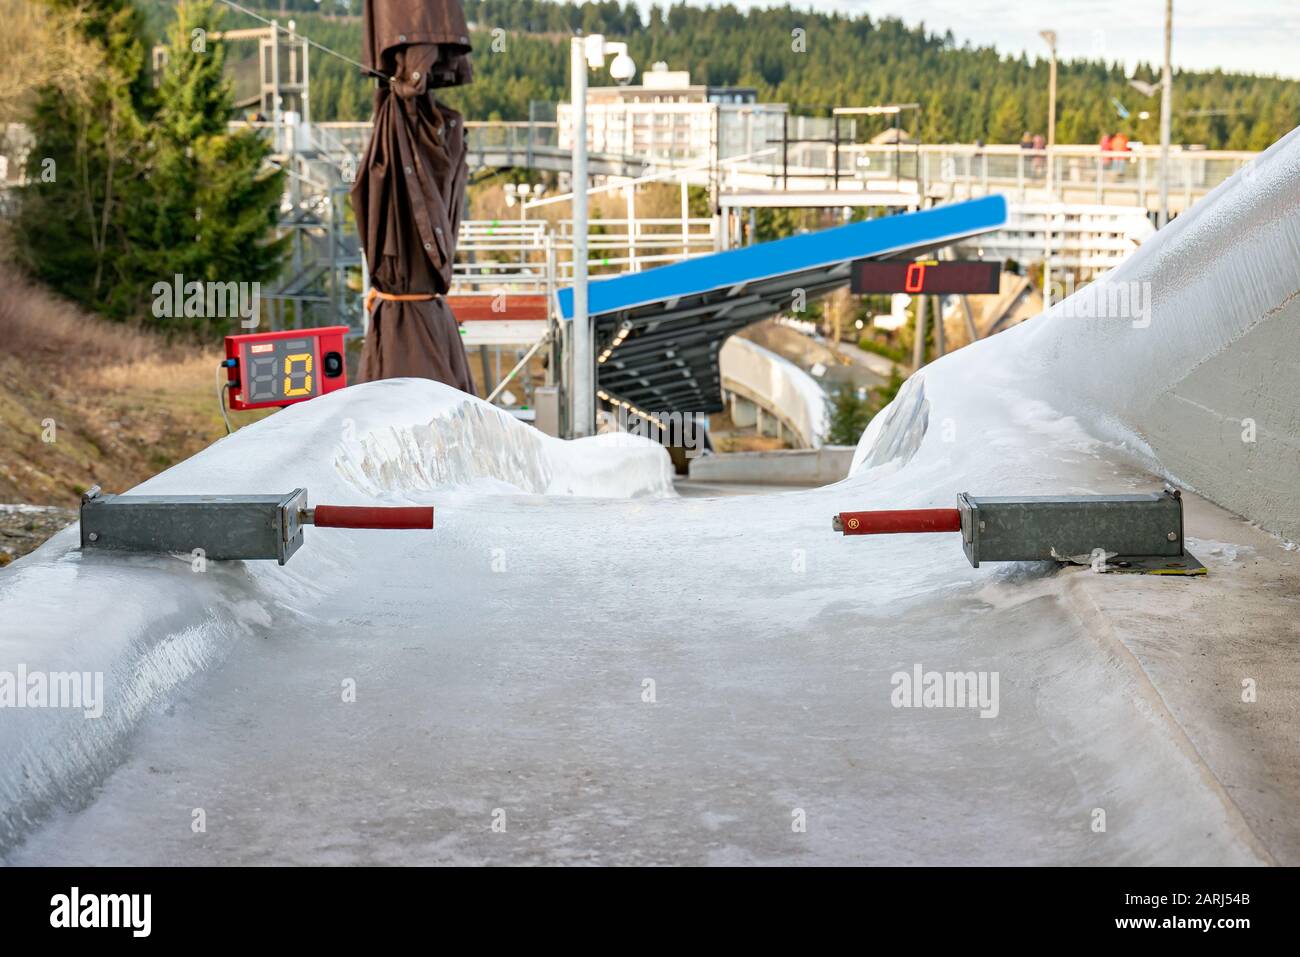 Bobsleigh ice channel in Winterberg. The digital clock measures the speed. Curvy trail in the ice. Stock Photo